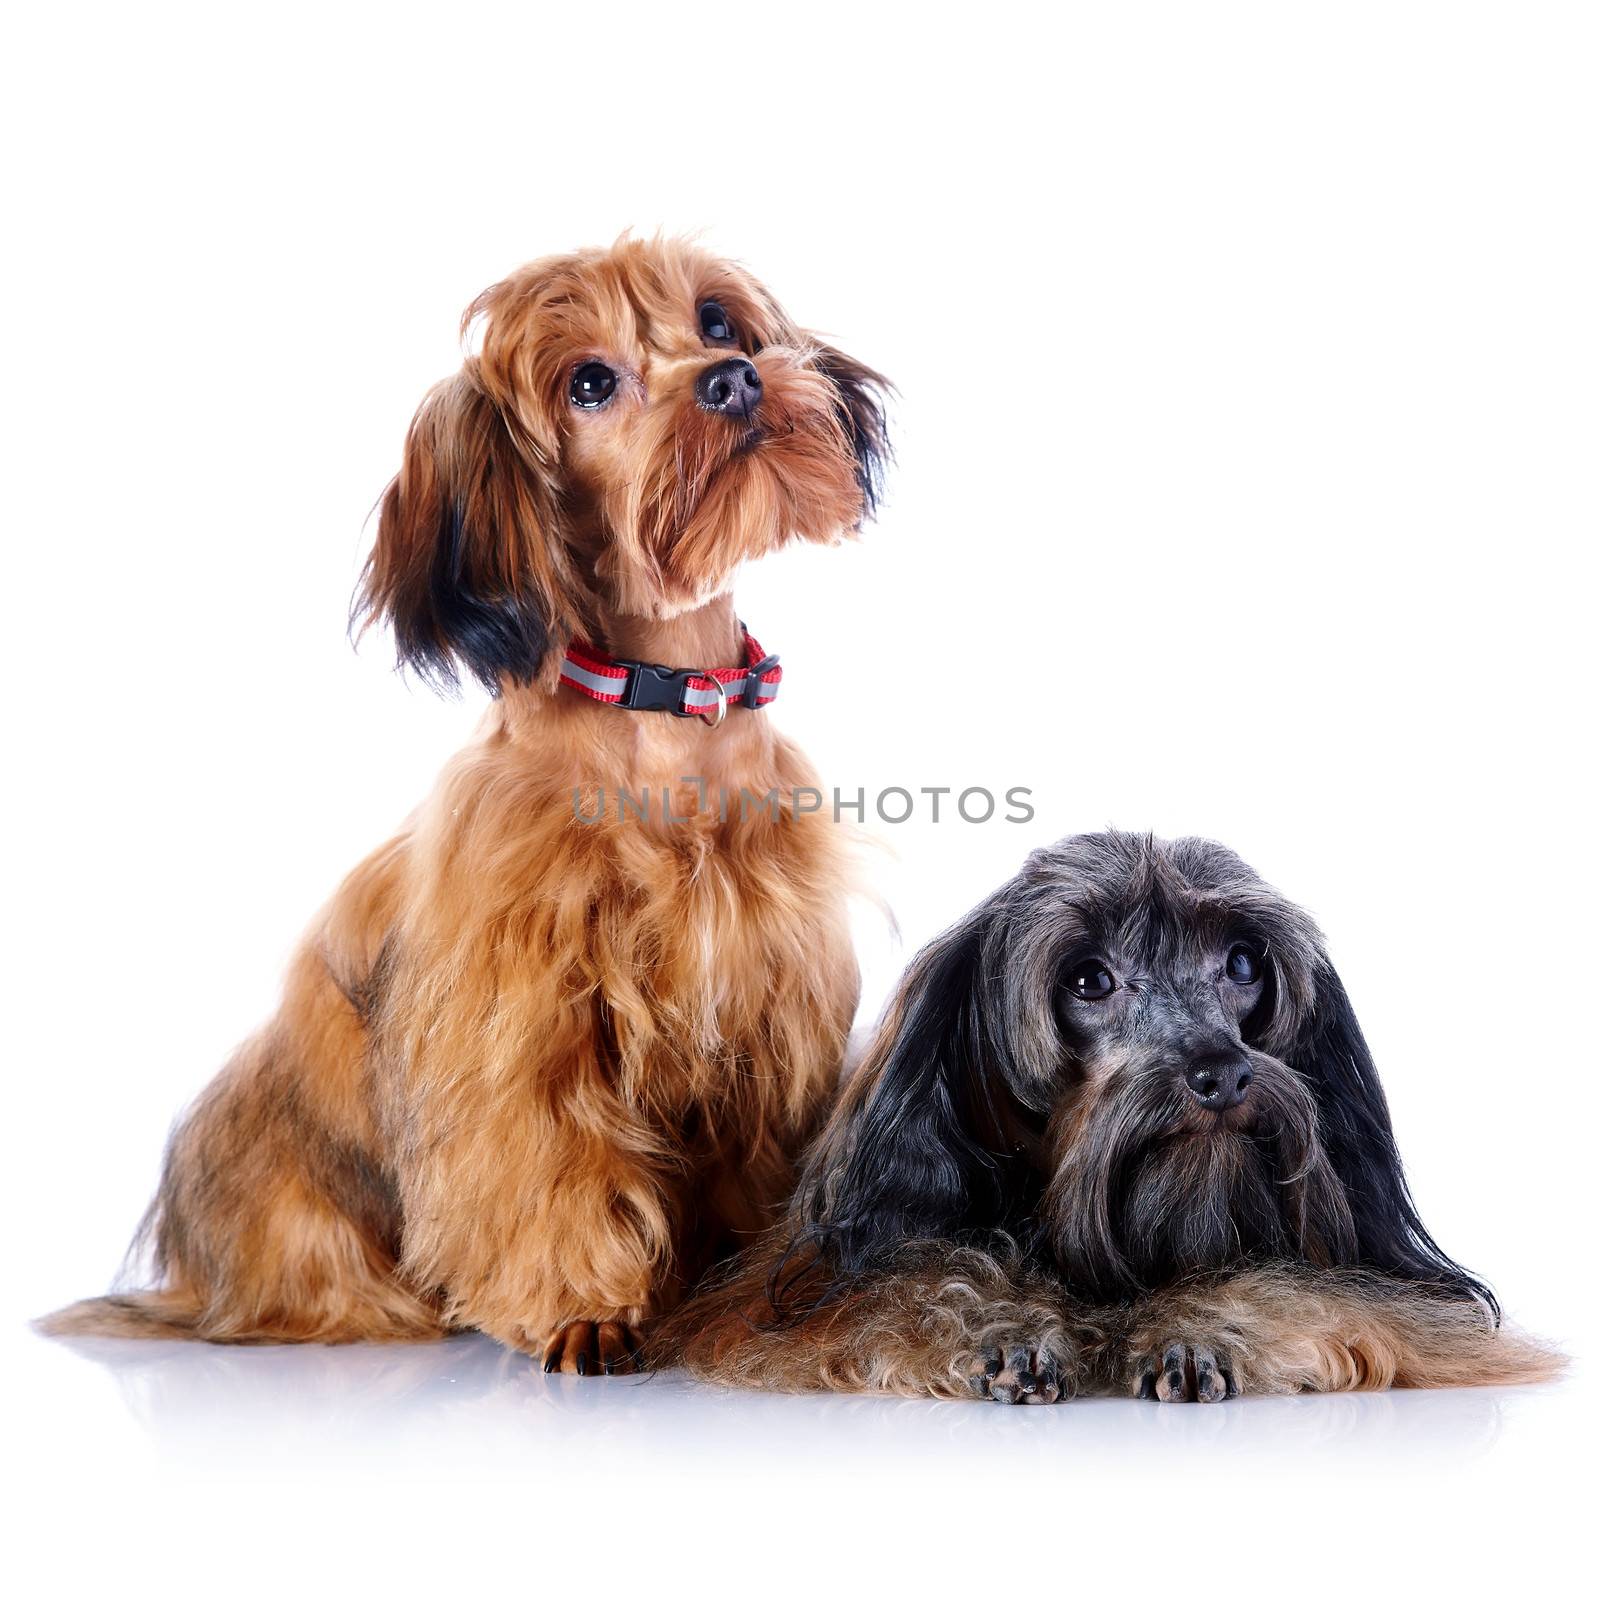 Two decorative doggies. Decorative dogs. Puppies of the Petersburg orchid on a white background